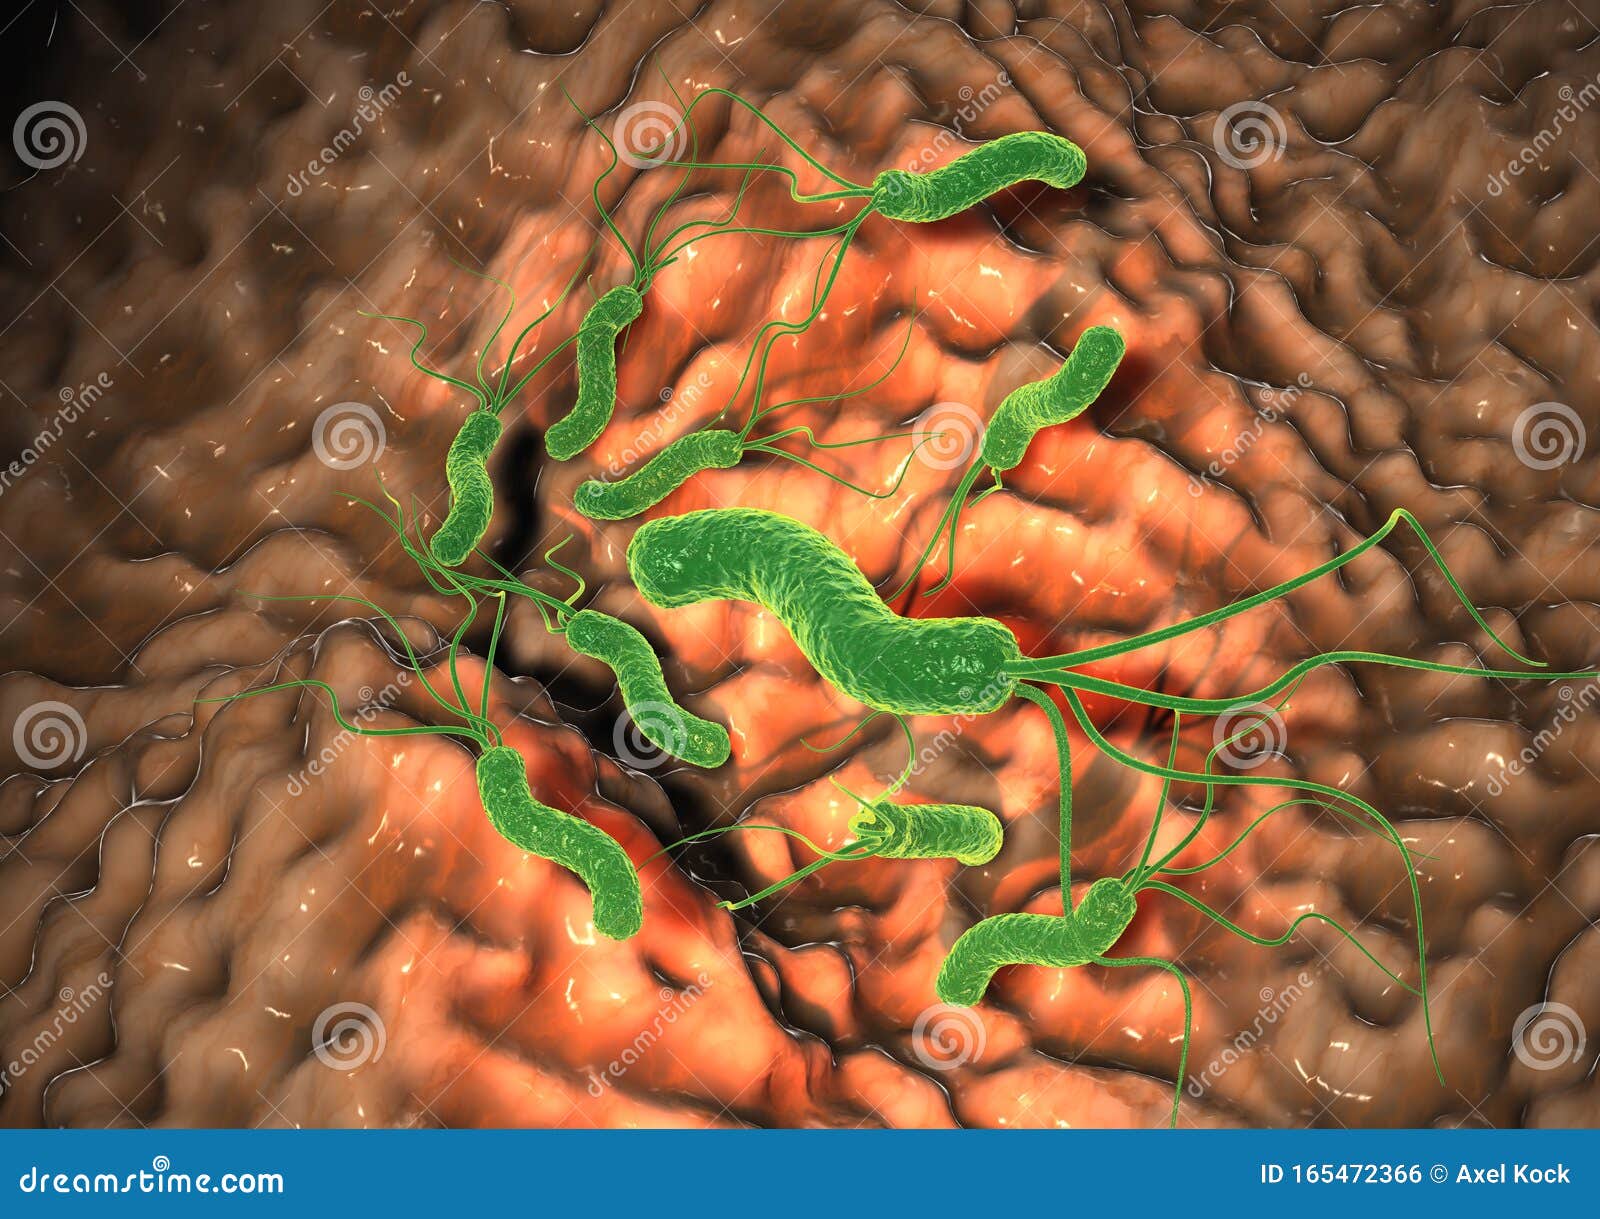 gastritis, helicobacter pylori bacteria damaging mucus layer, medically accurate 3d 